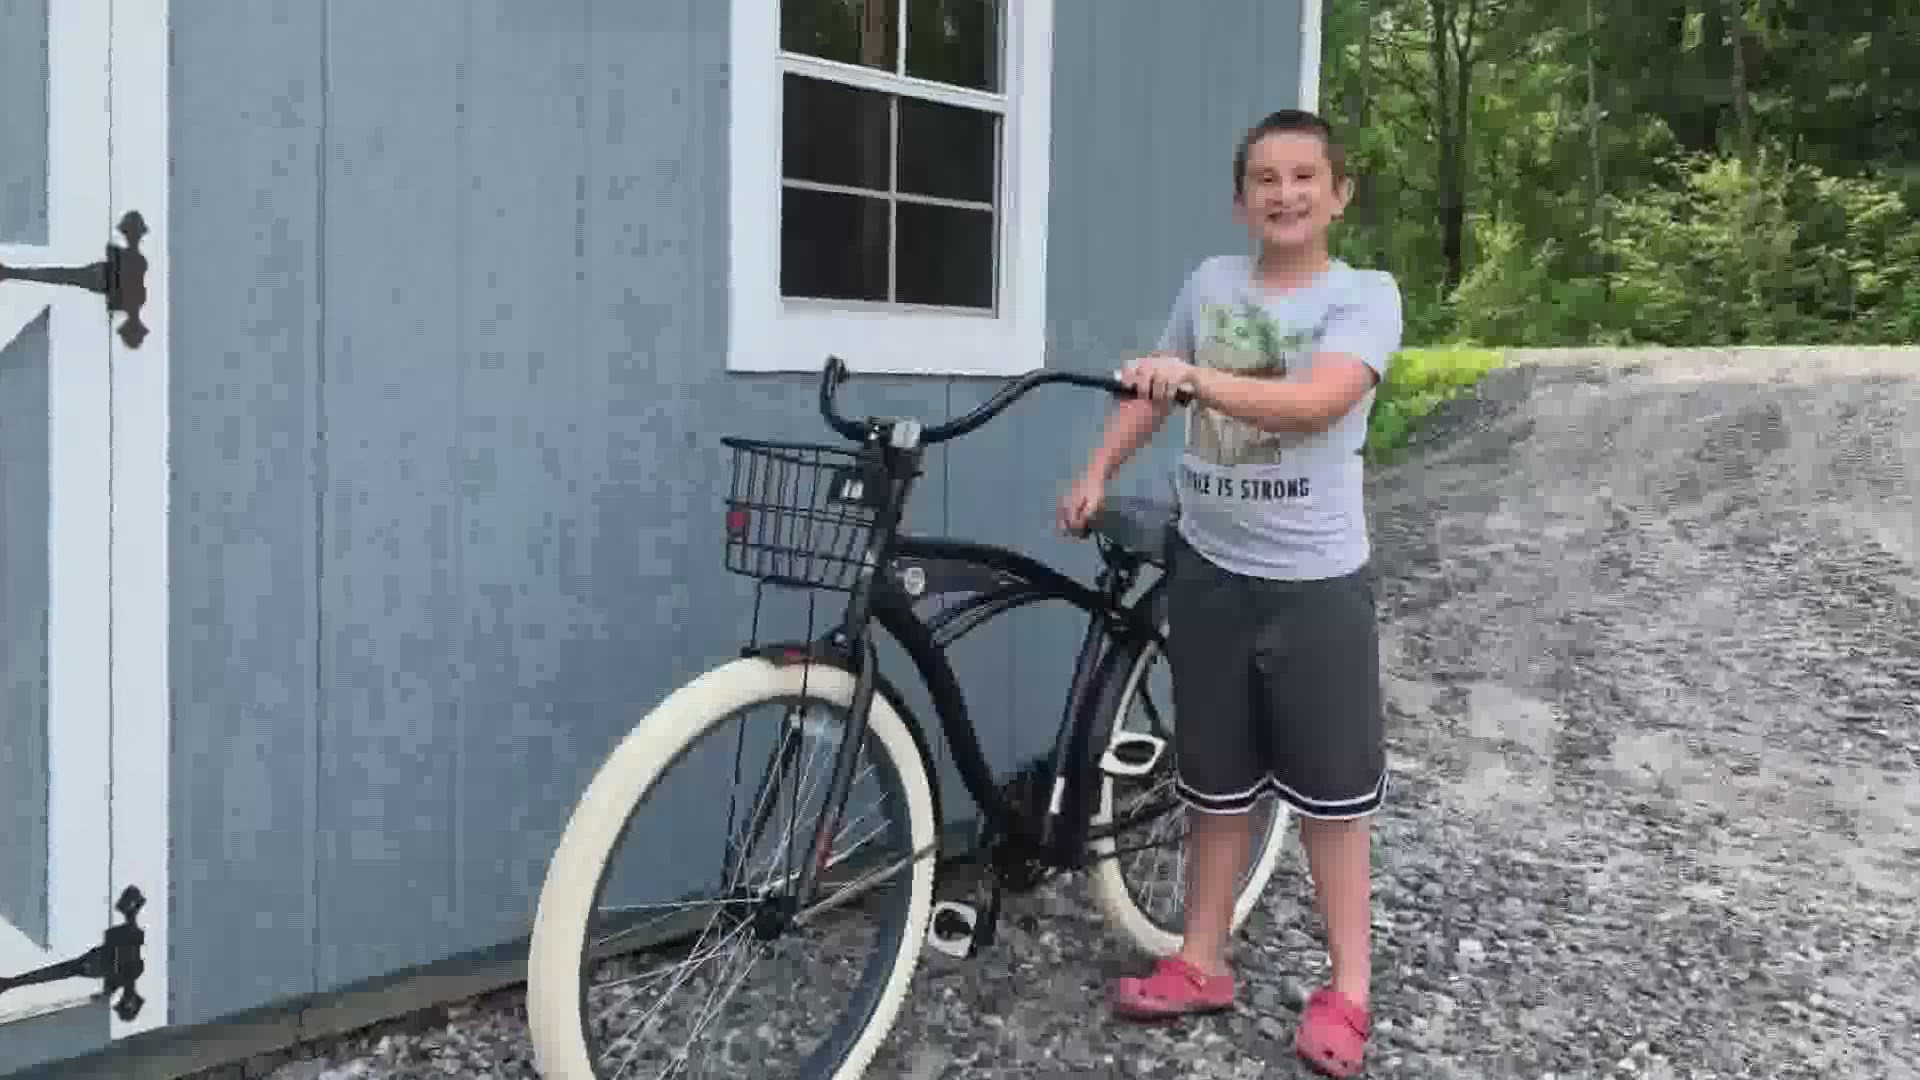 Connor Ridley of Bowdoin is raffling off a bike he won through a reading contest to raise money for Connor Dobbyn, who is battling Sanfilippo syndrome Type C.